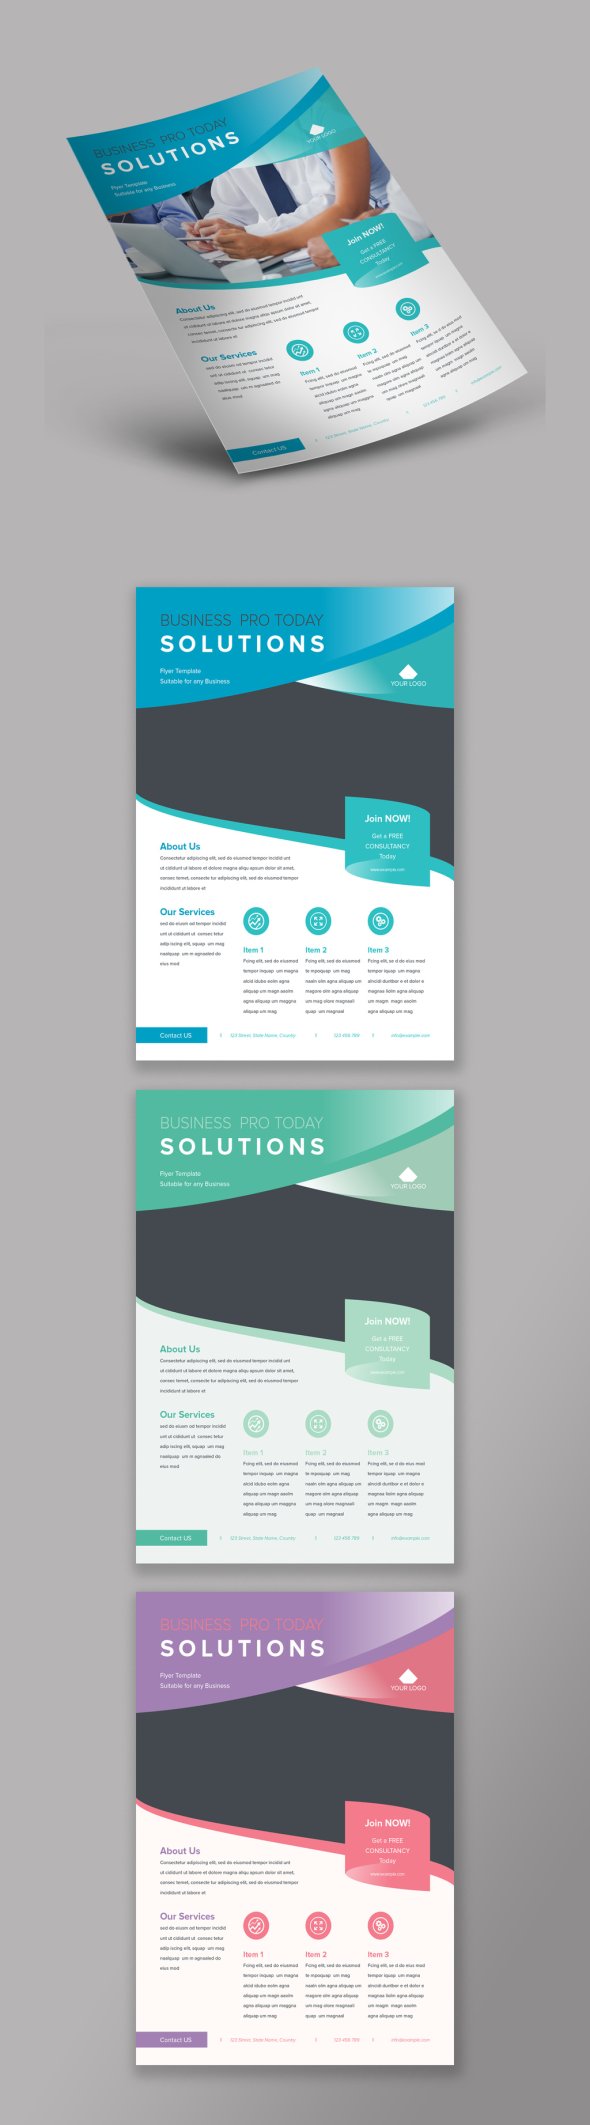 AdobeStock - Business Flyer Layout with Gradients - 218806929